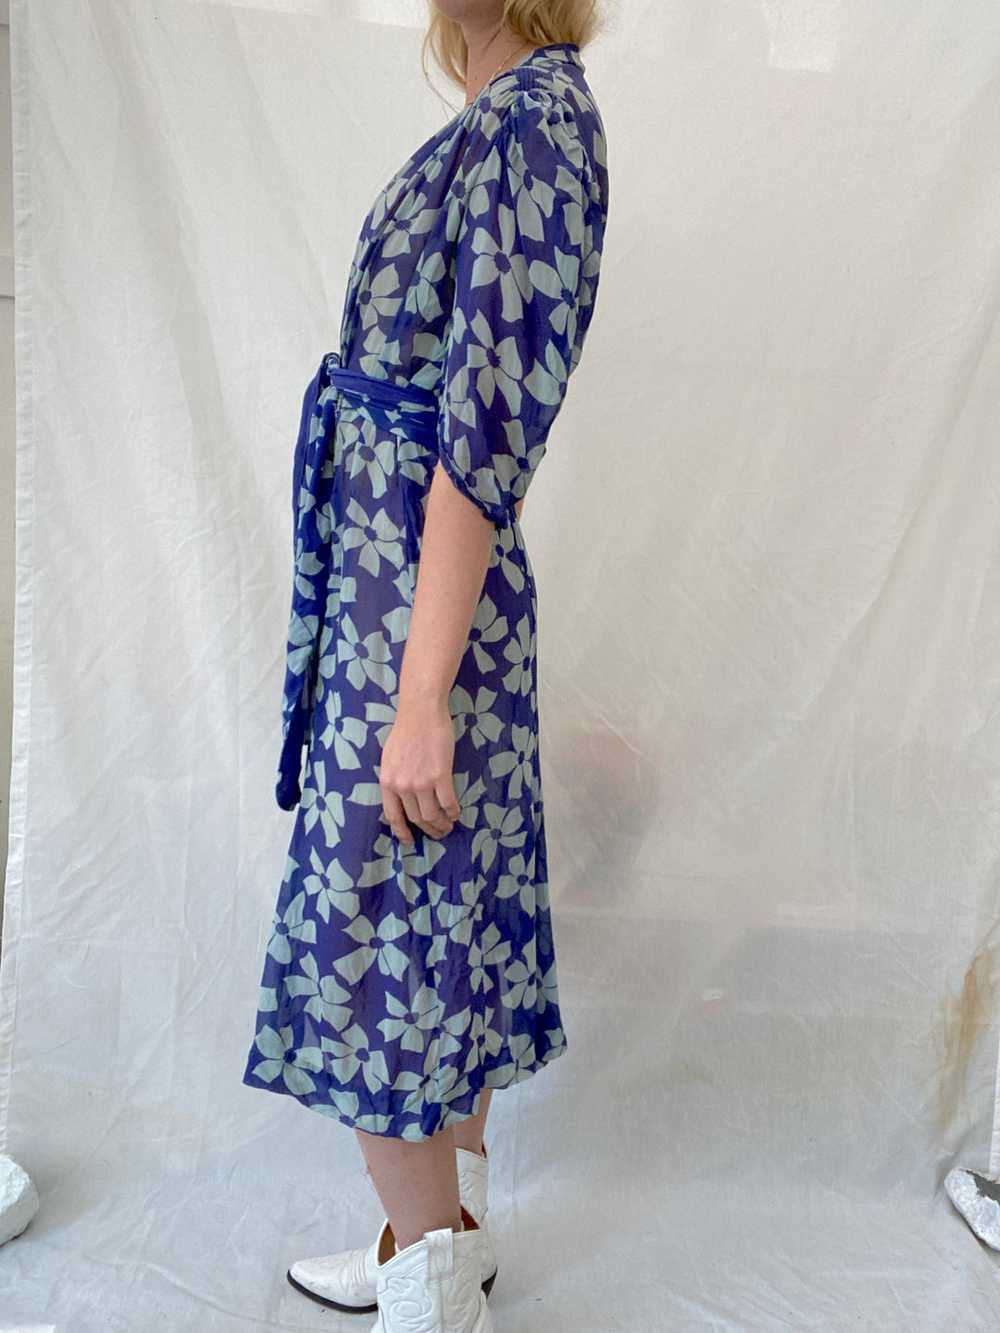 Blue Floral Print Chiffon Dress with Puffed Sleev… - image 6